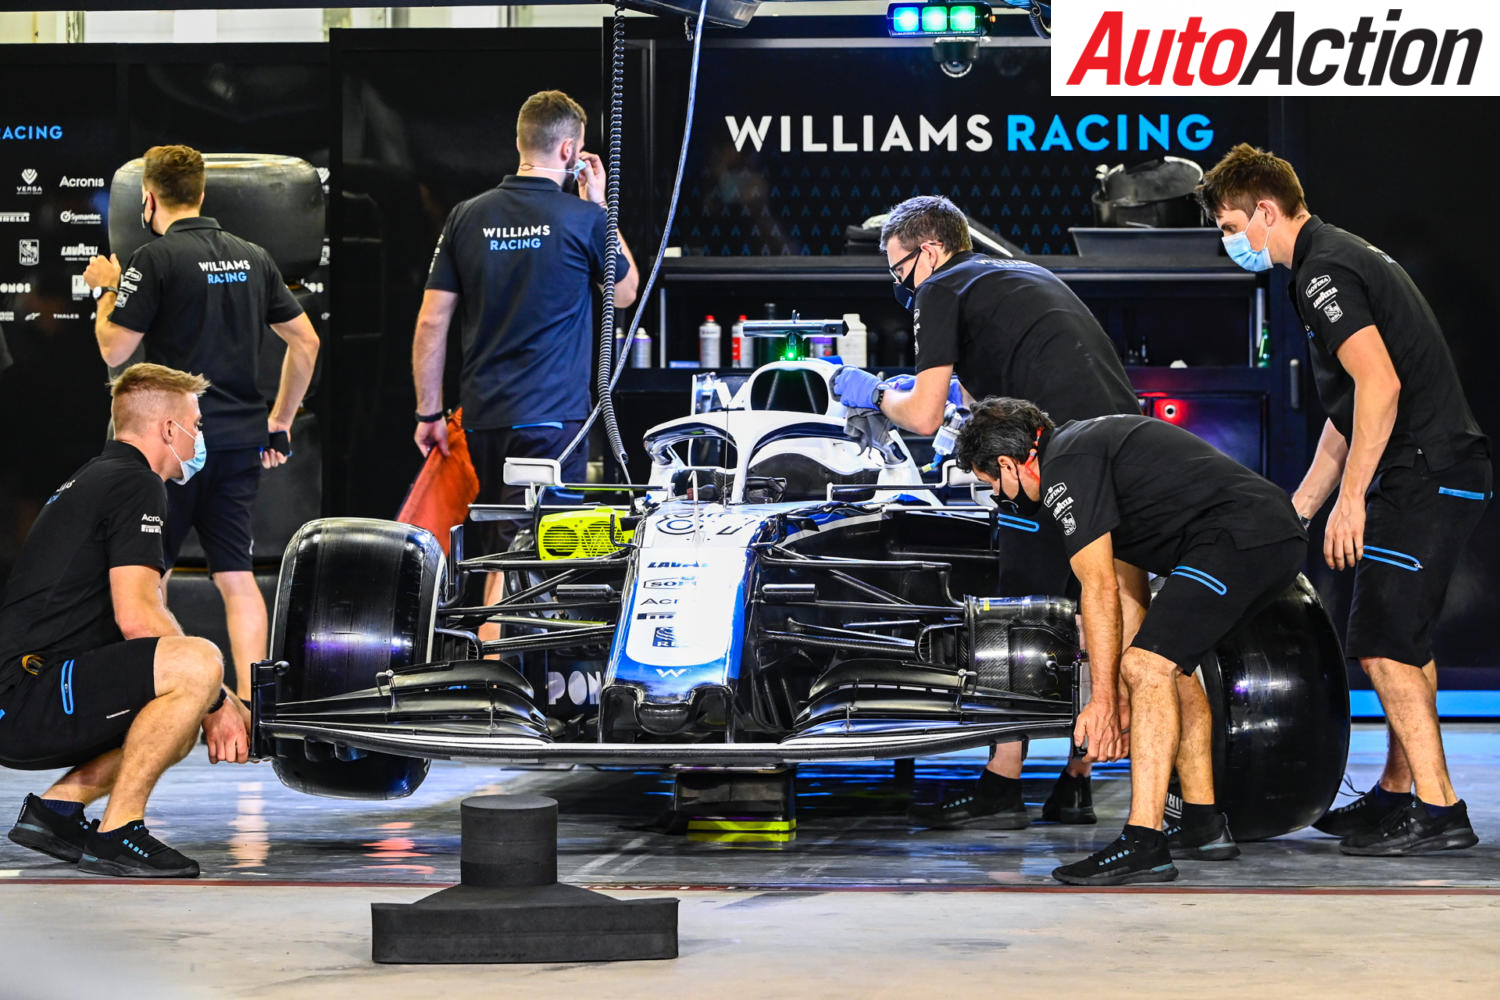 Williams CEO to take Team Principal role - Image: Motorsport Images